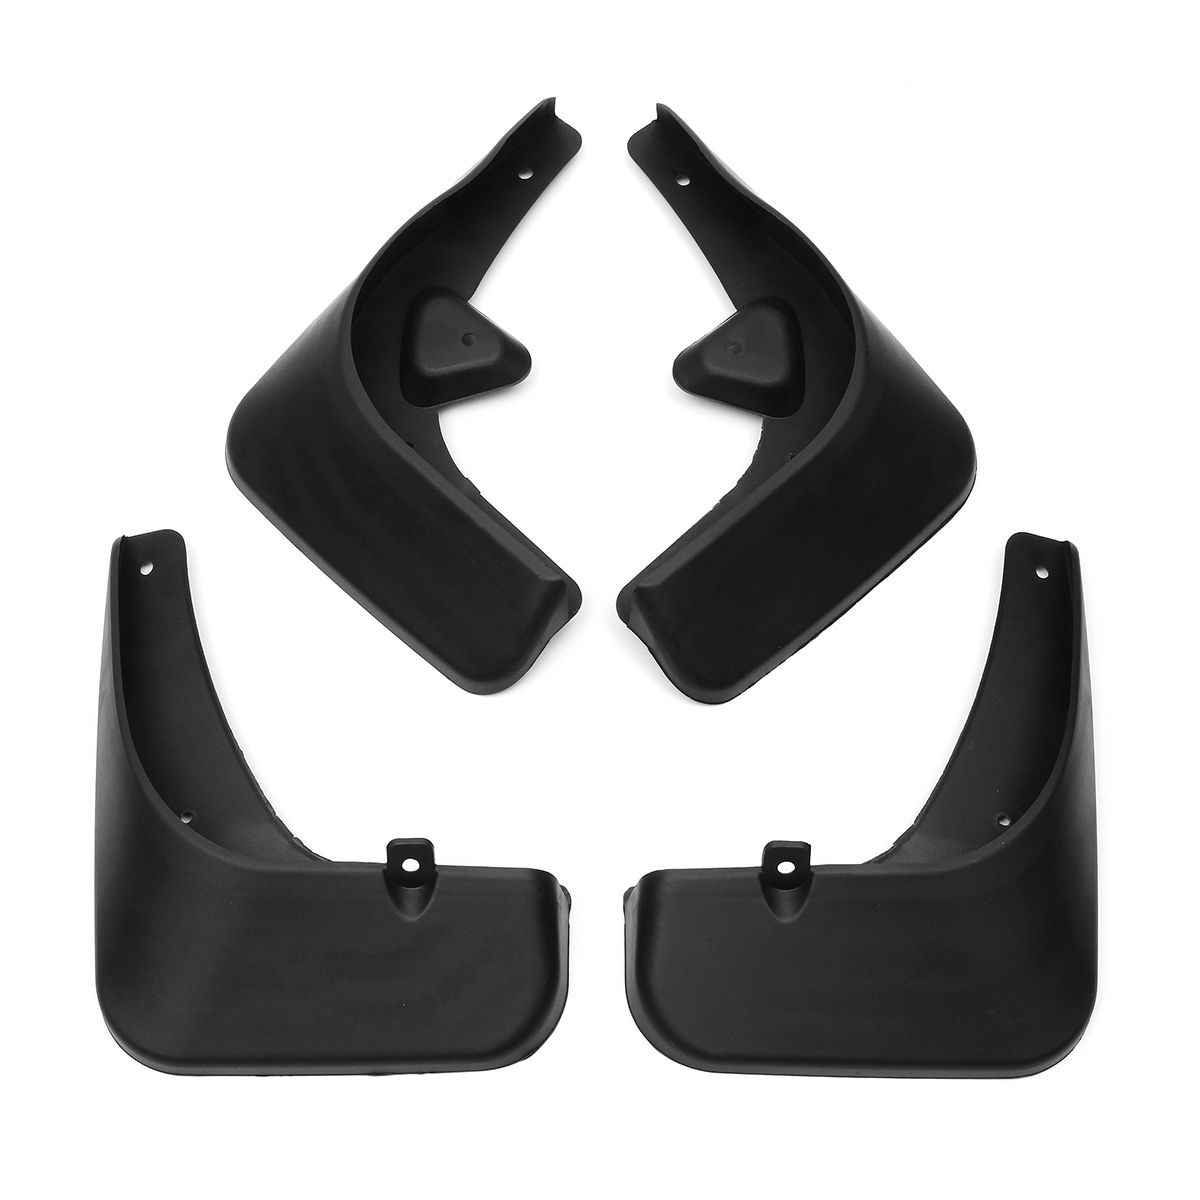 4Pcs-Front-And-Rear-Mud-Flaps-Car-Mudguards-For-Peugeot-Sedan-408-2010-2015-1389187